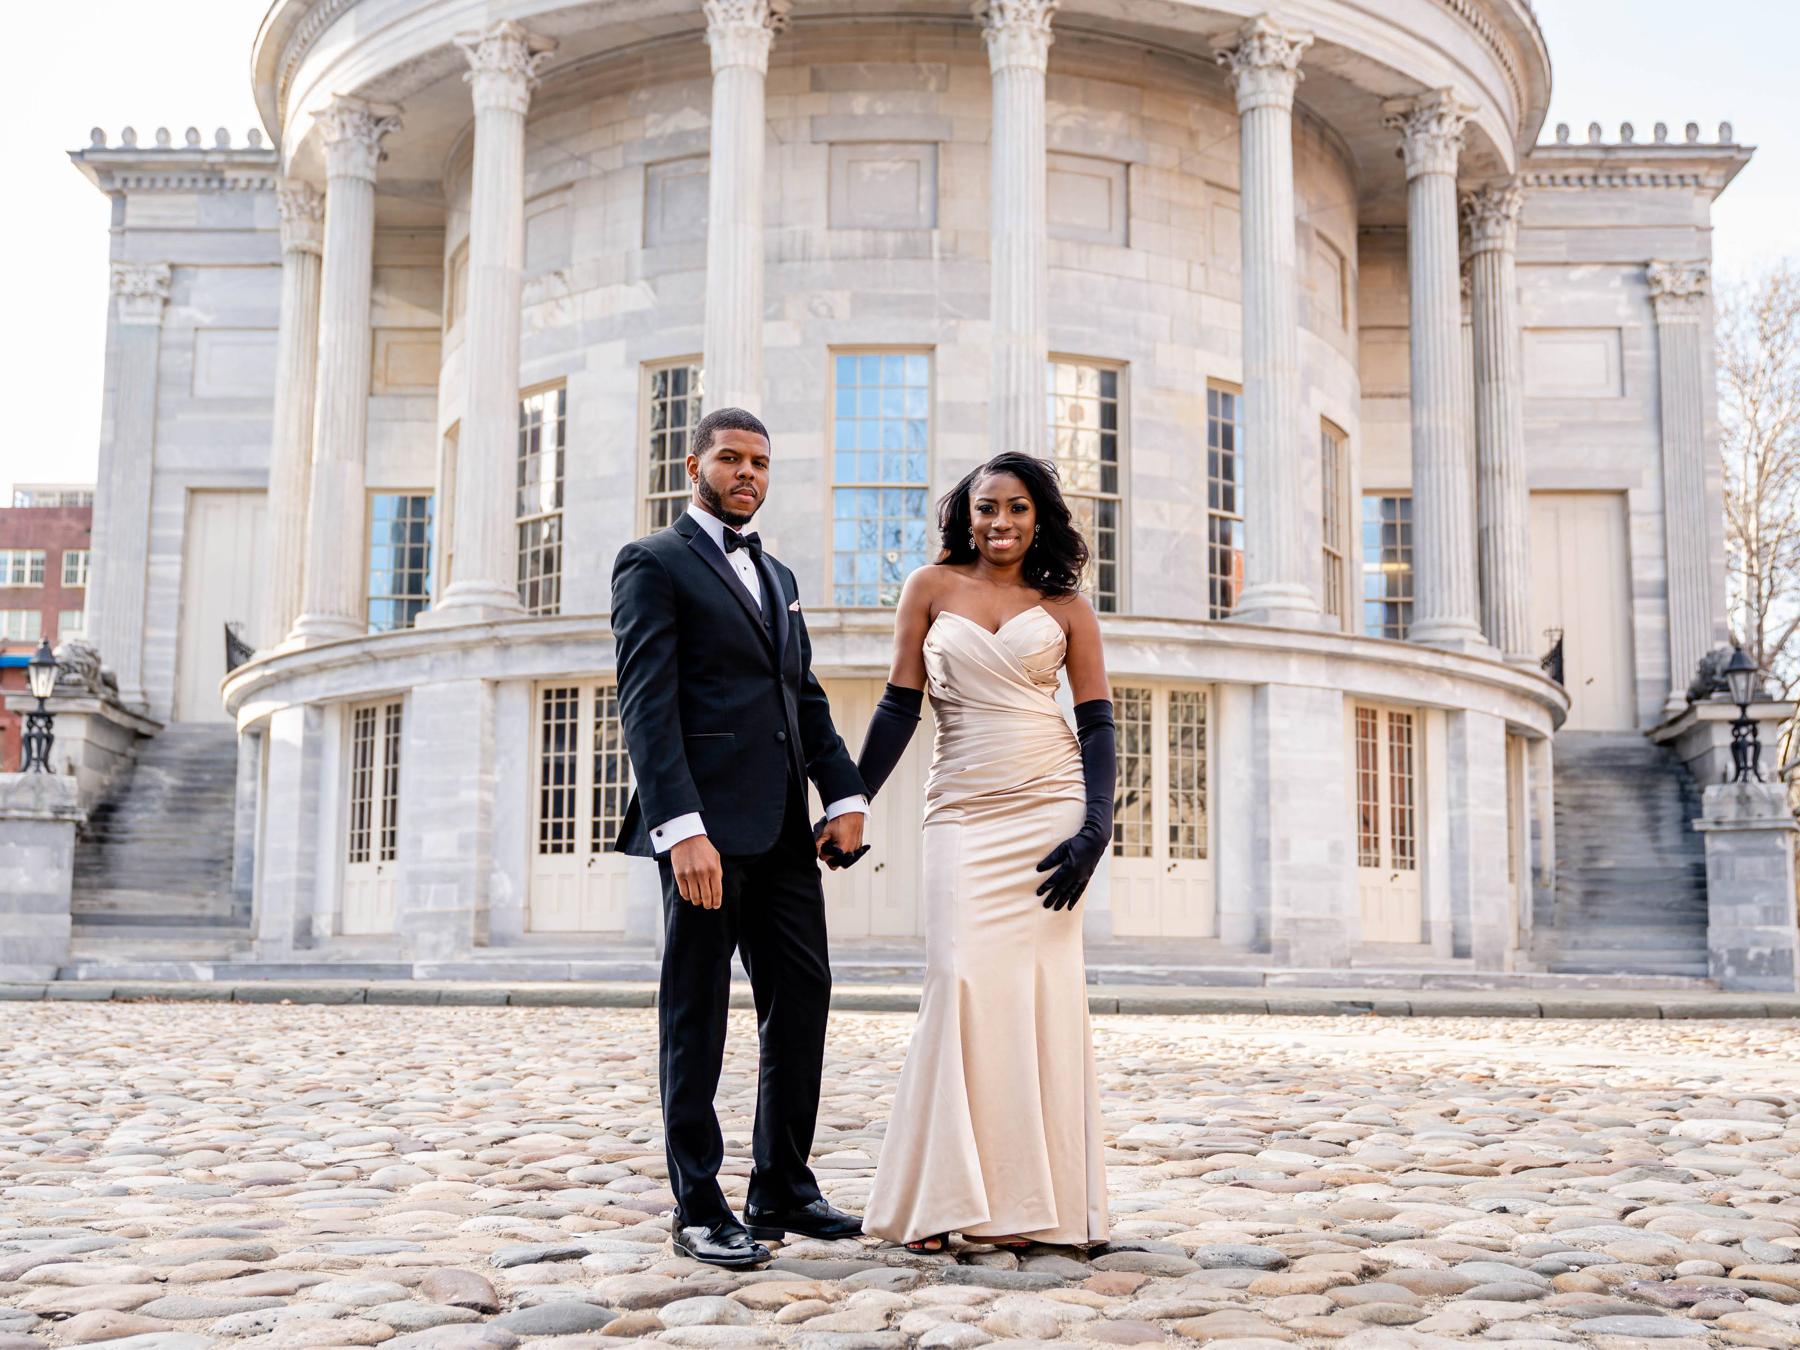 The Wedding Website of Jessica Roberts and Marcus Savage